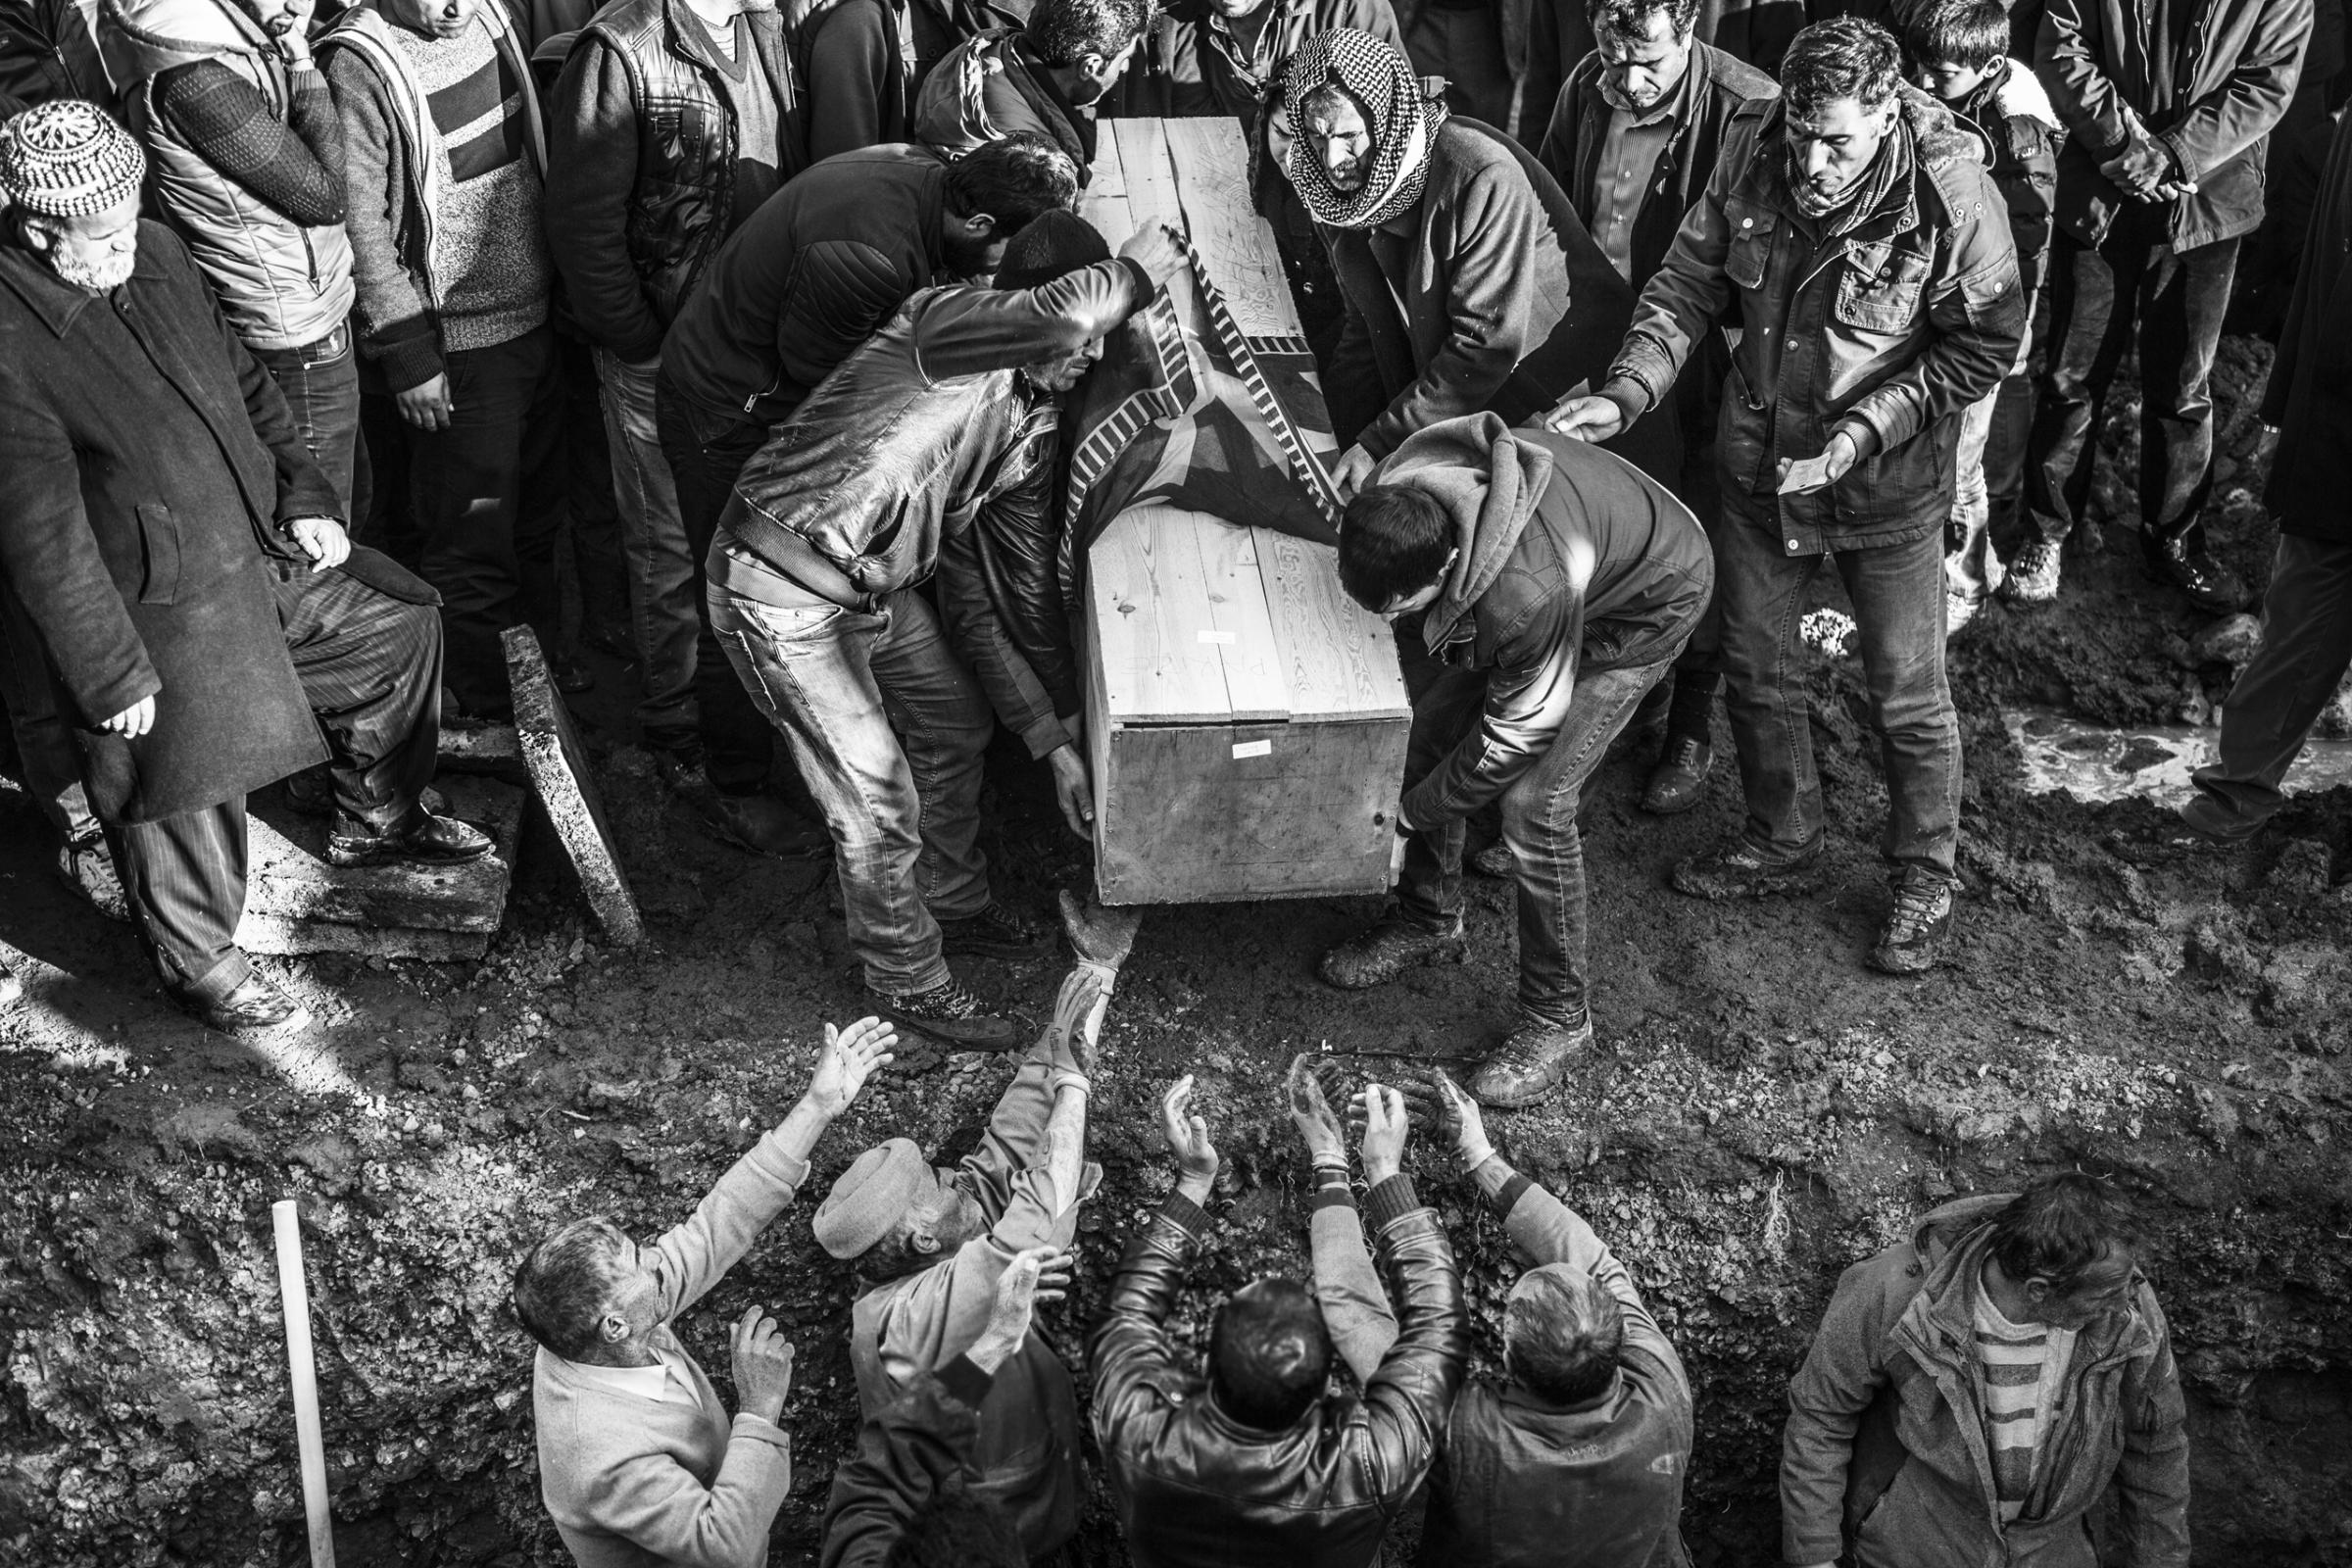 A funeral for a victim of clashes between PKK and Turkish special forces in the Kurdish-dominated southeast of Turkey, Jan. 2016.